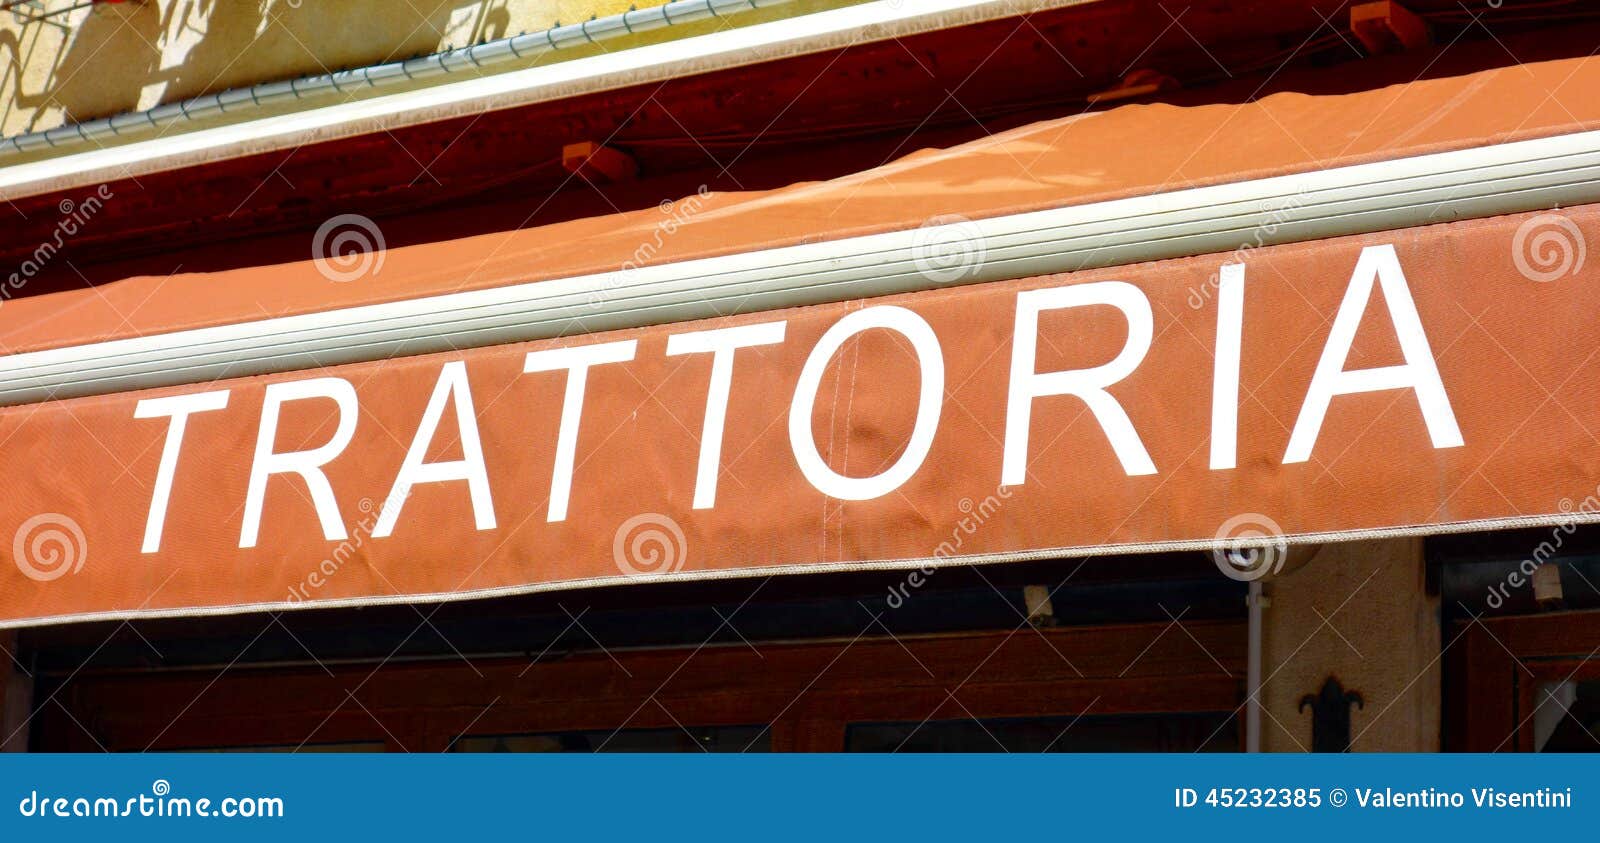  Trattoria Sign  stock image Image of industry business 